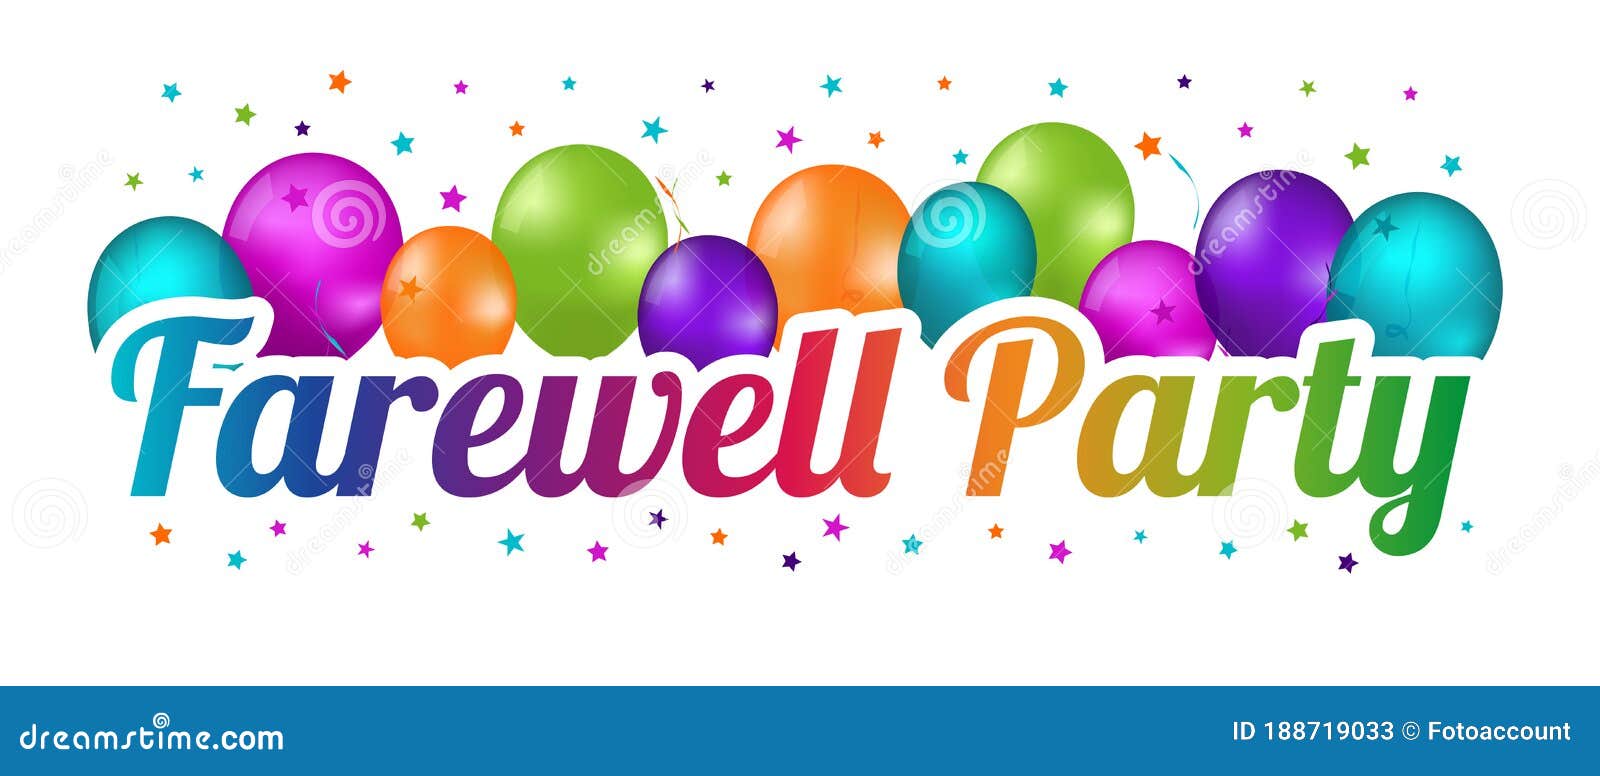 Farewell Party Banner - Colorful Vector Illustration with Balloons and  Confetti Stars Stock Vector - Illustration of event, farewell: 188719033